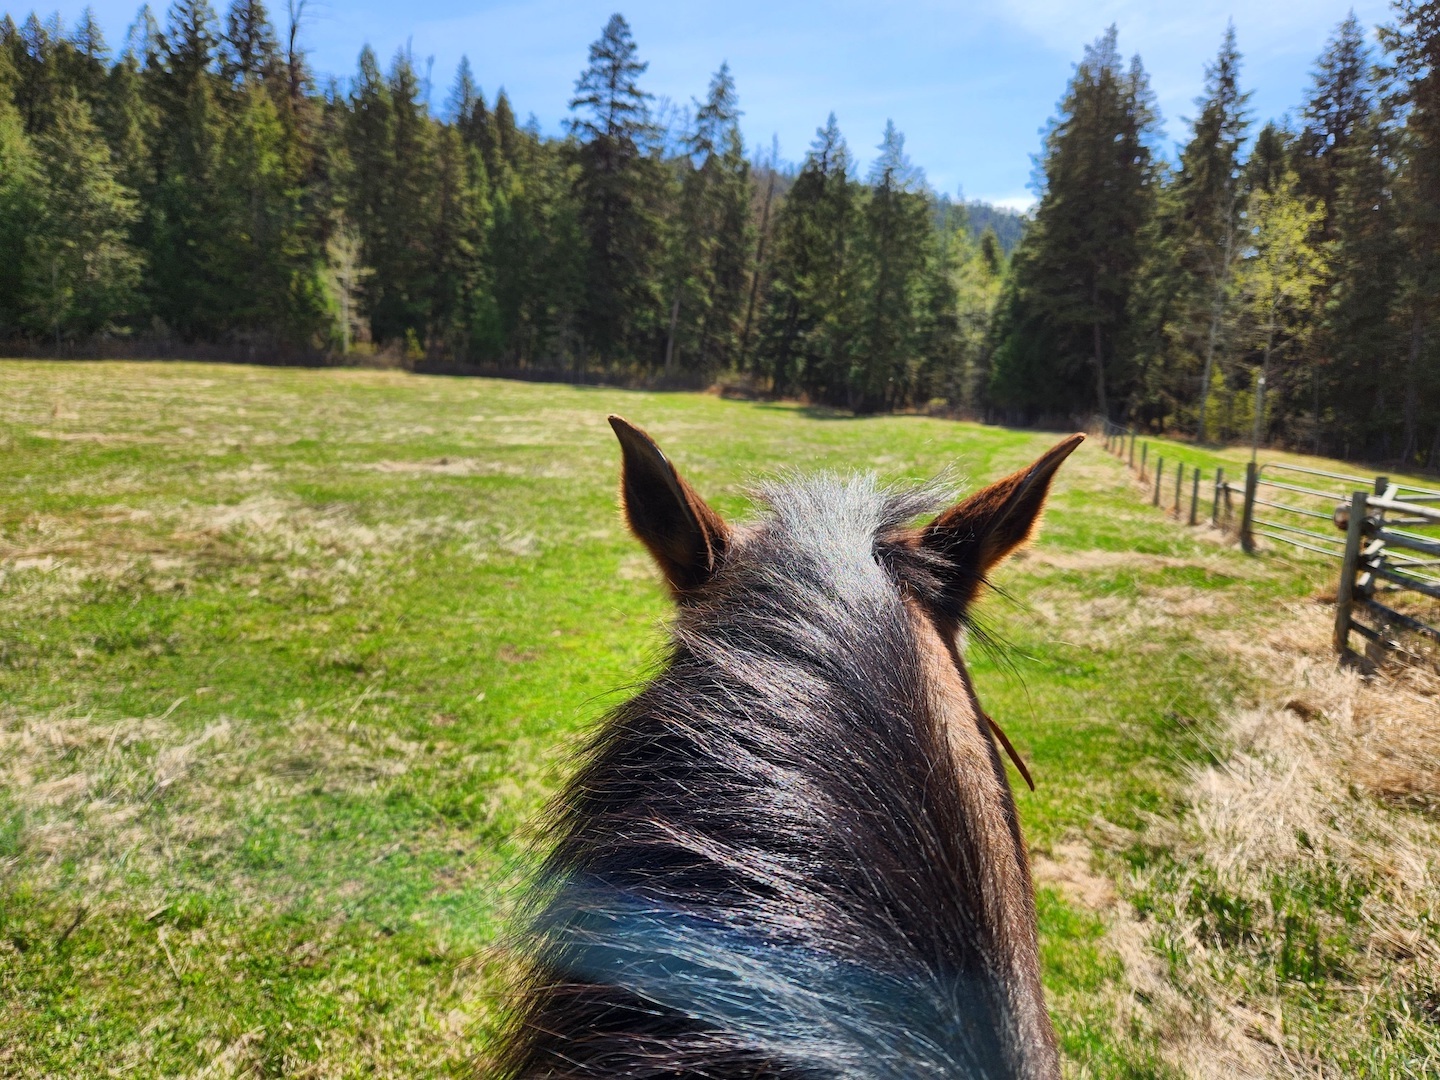 photo of a sunny field seen through a horse's ears while riding, a fence along the right and a line of trees in the distance